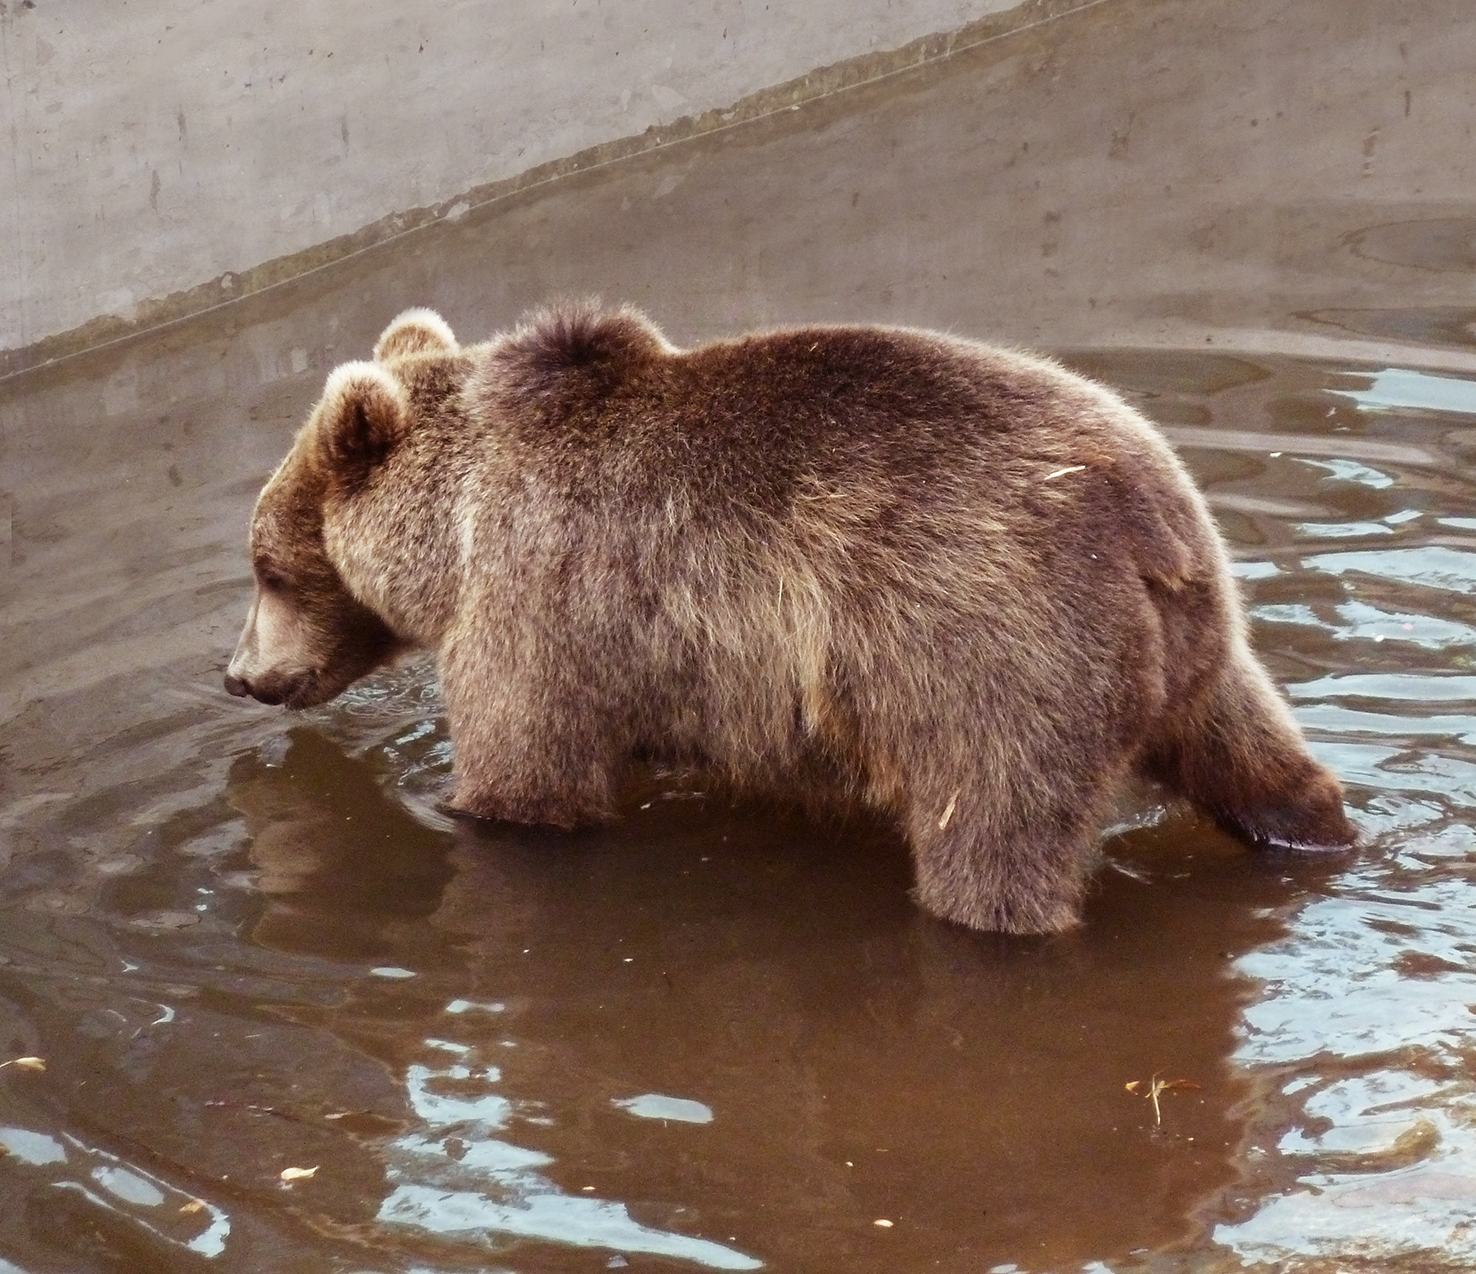 photo of brown bear in water